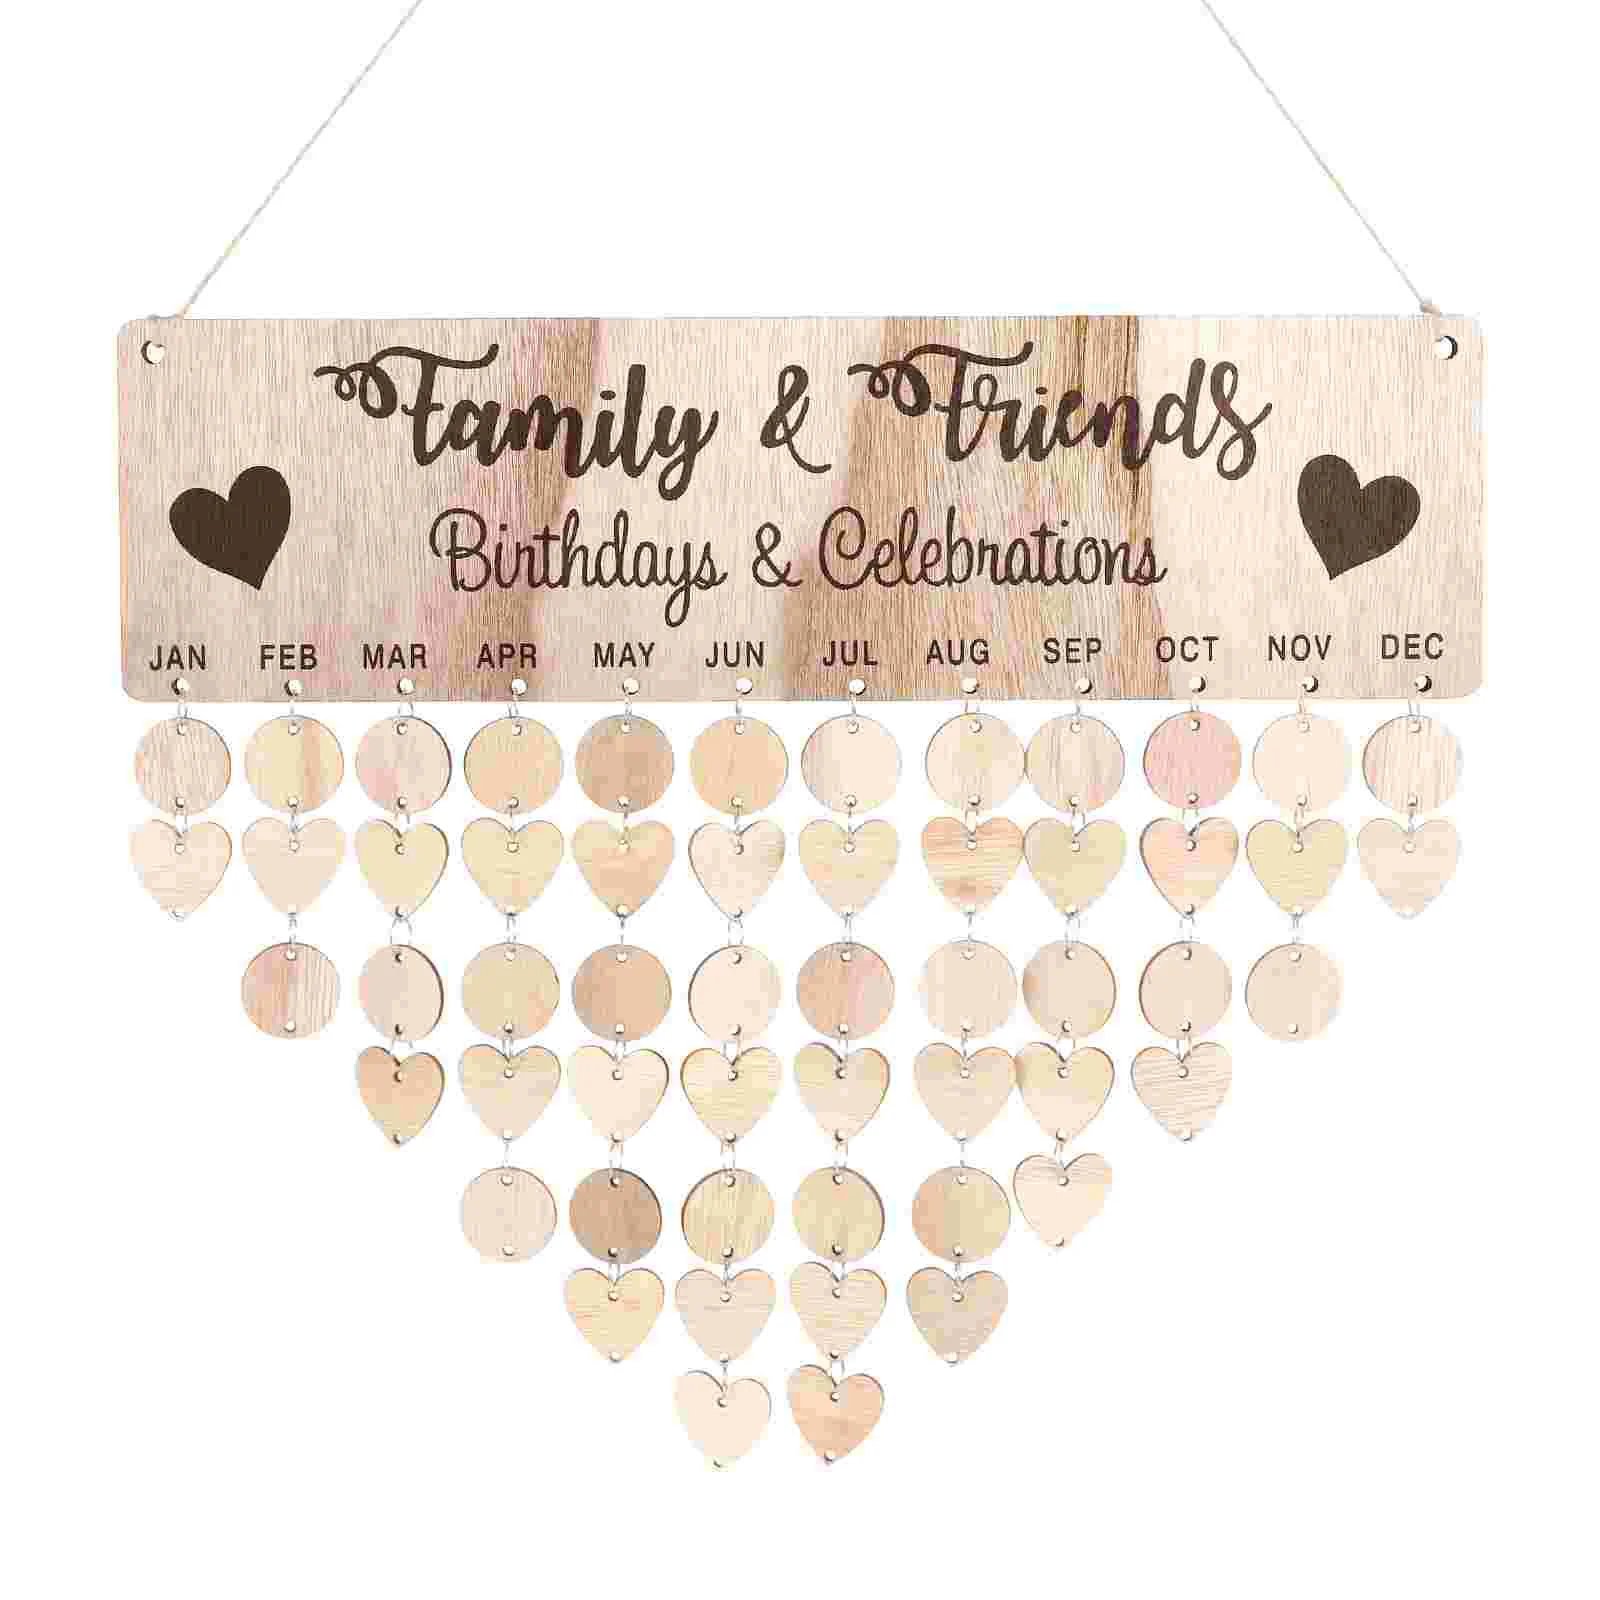 Calendar Birthday Family Board Hanging Wooden Wall Reminder Plaque Diy Personalized Wood Gifts Date Reminding Home Decor Tags